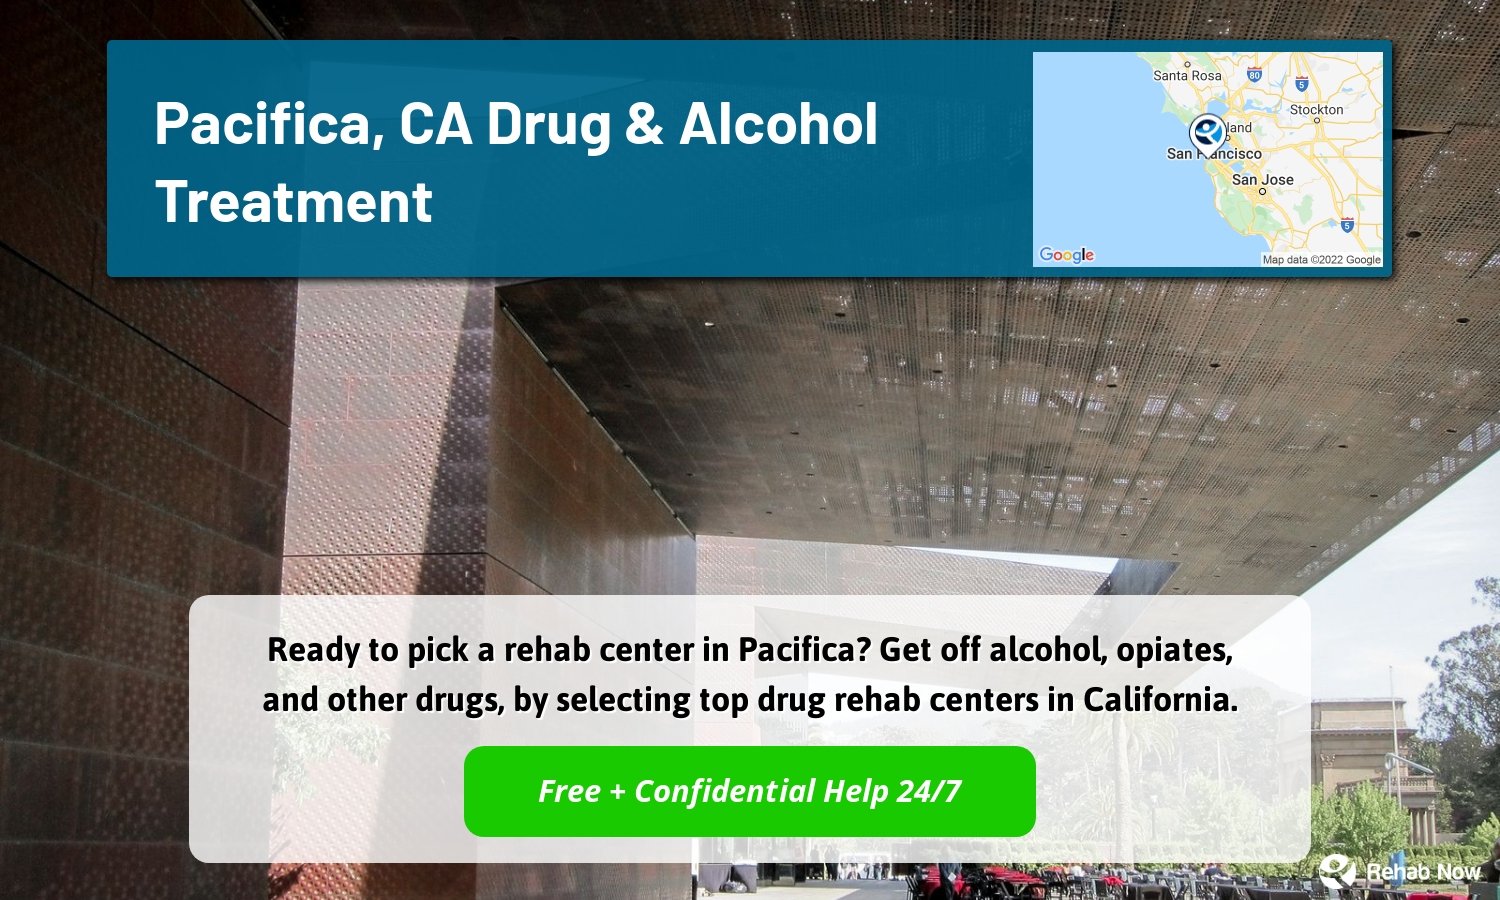 Ready to pick a rehab center in Pacifica? Get off alcohol, opiates, and other drugs, by selecting top drug rehab centers in California.